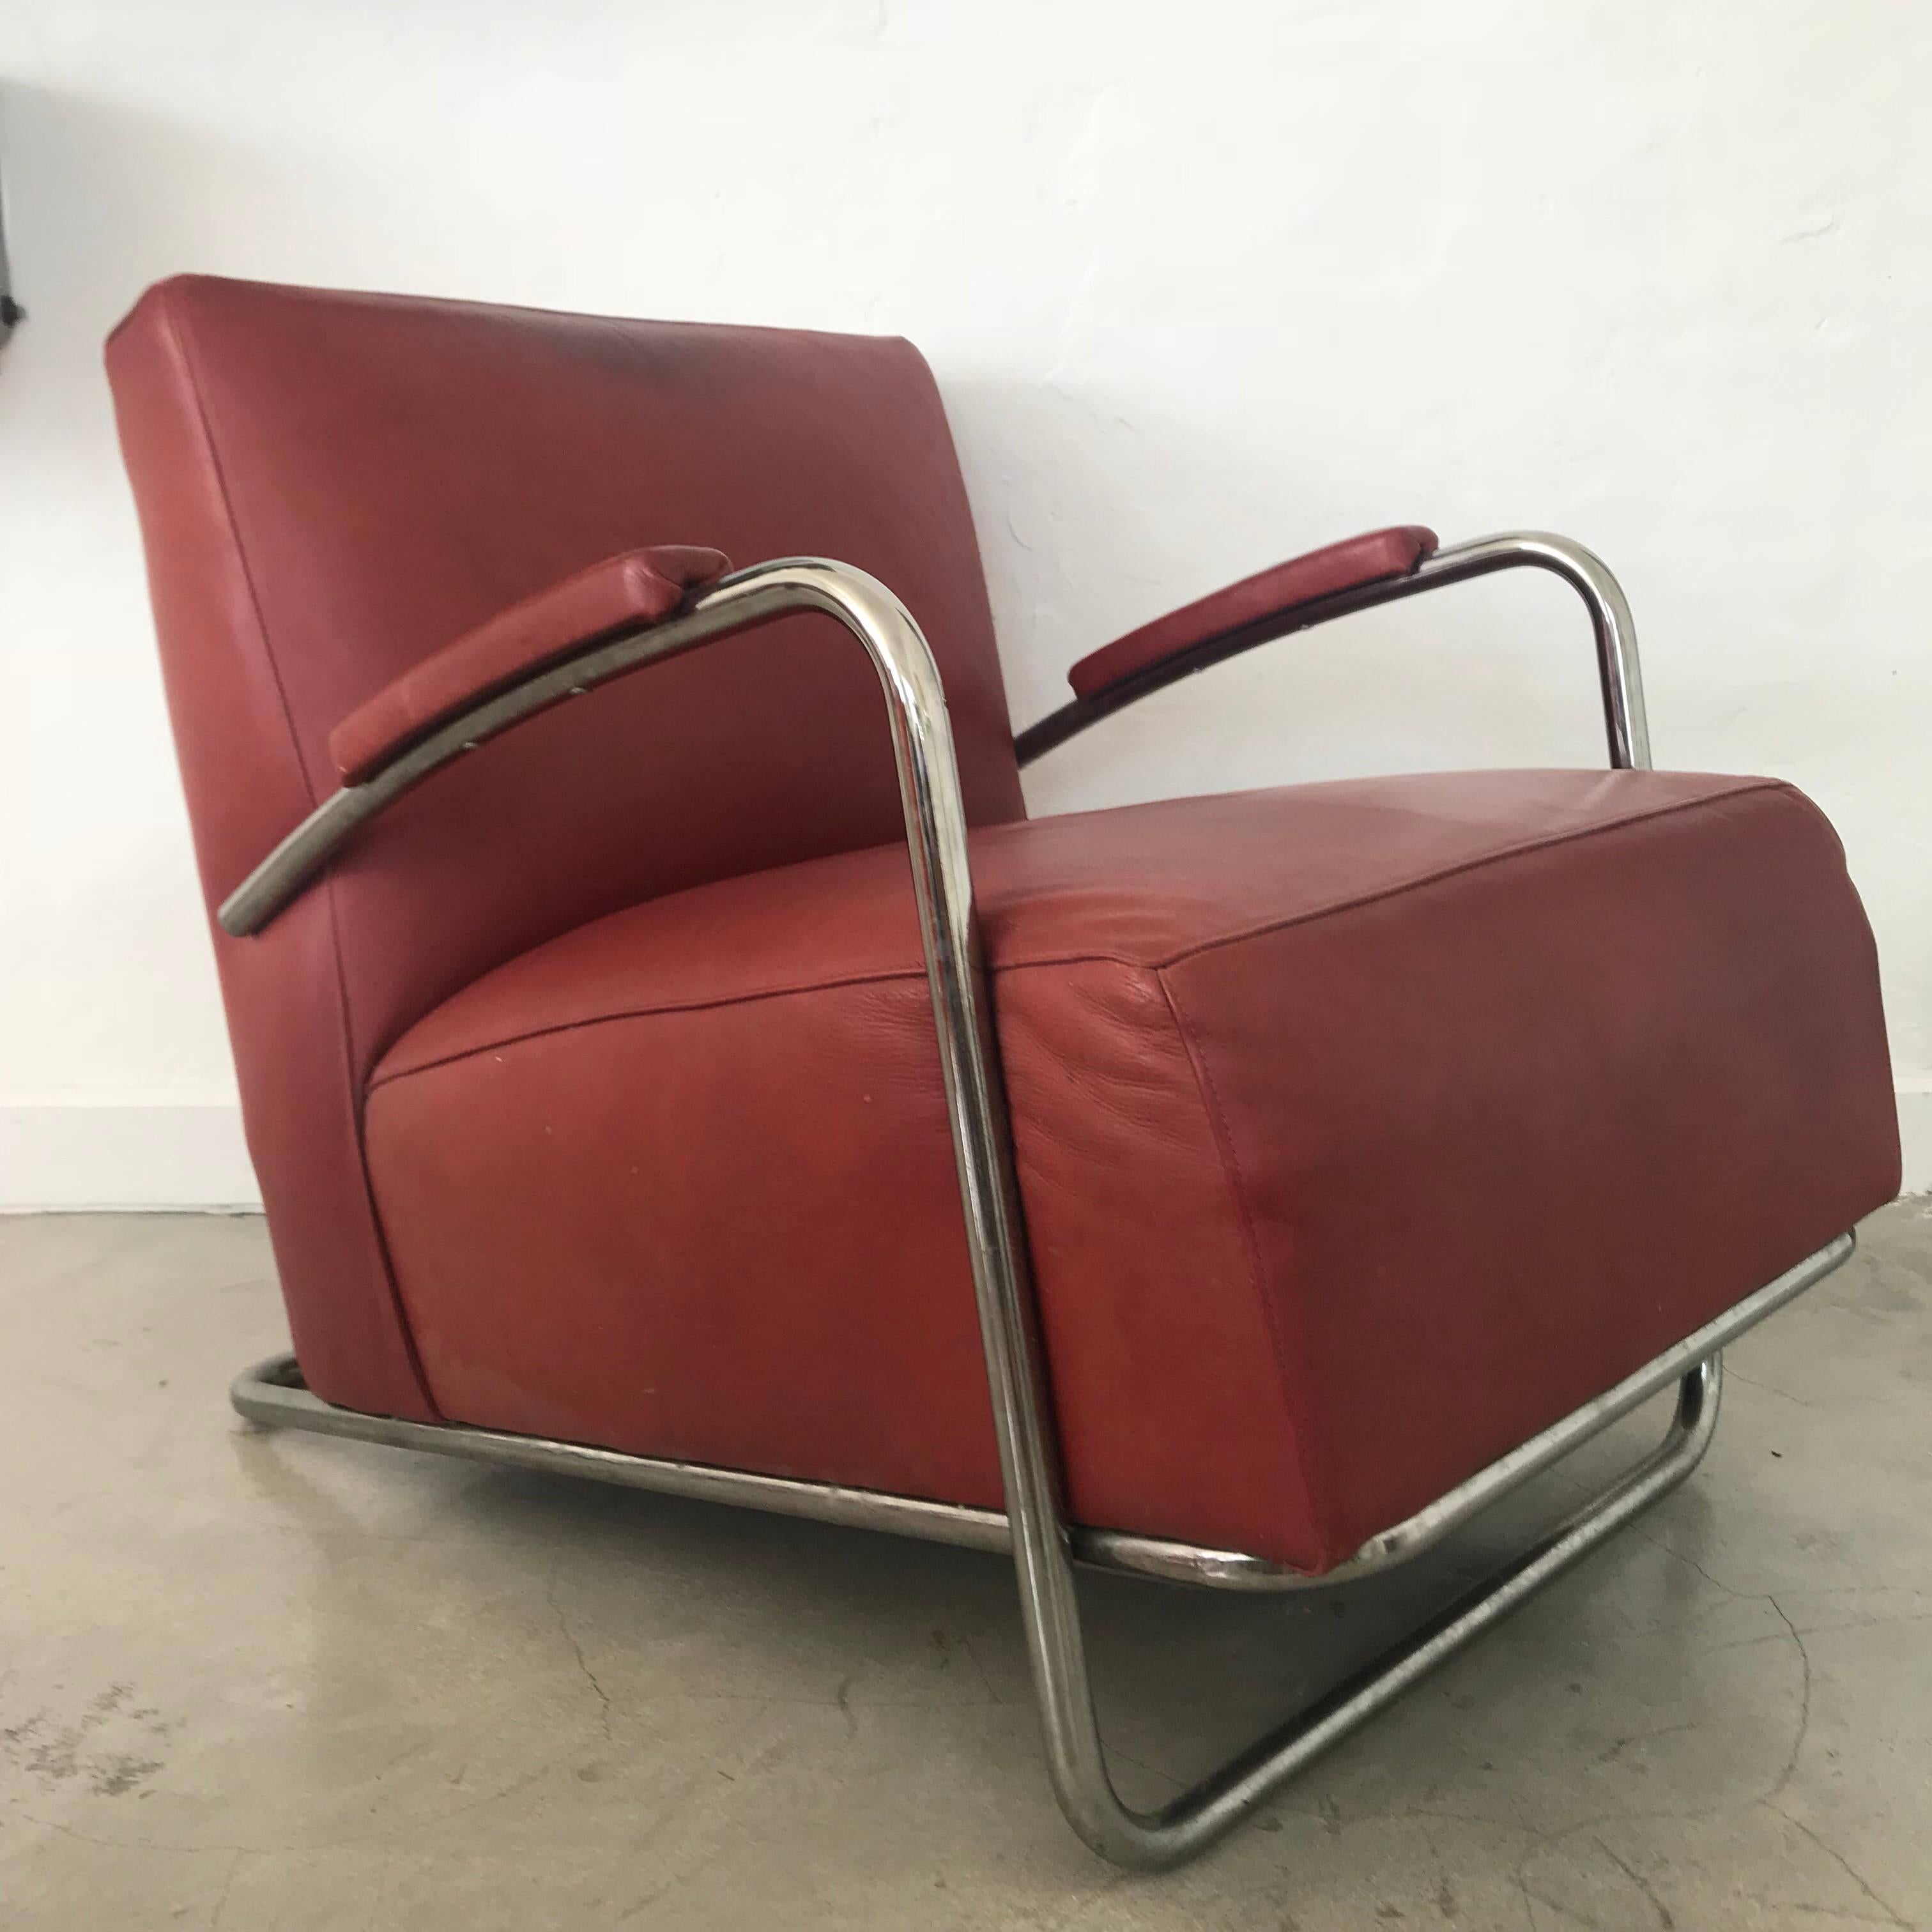 American Art Deco Tubular Chrome and Red Leather Chair